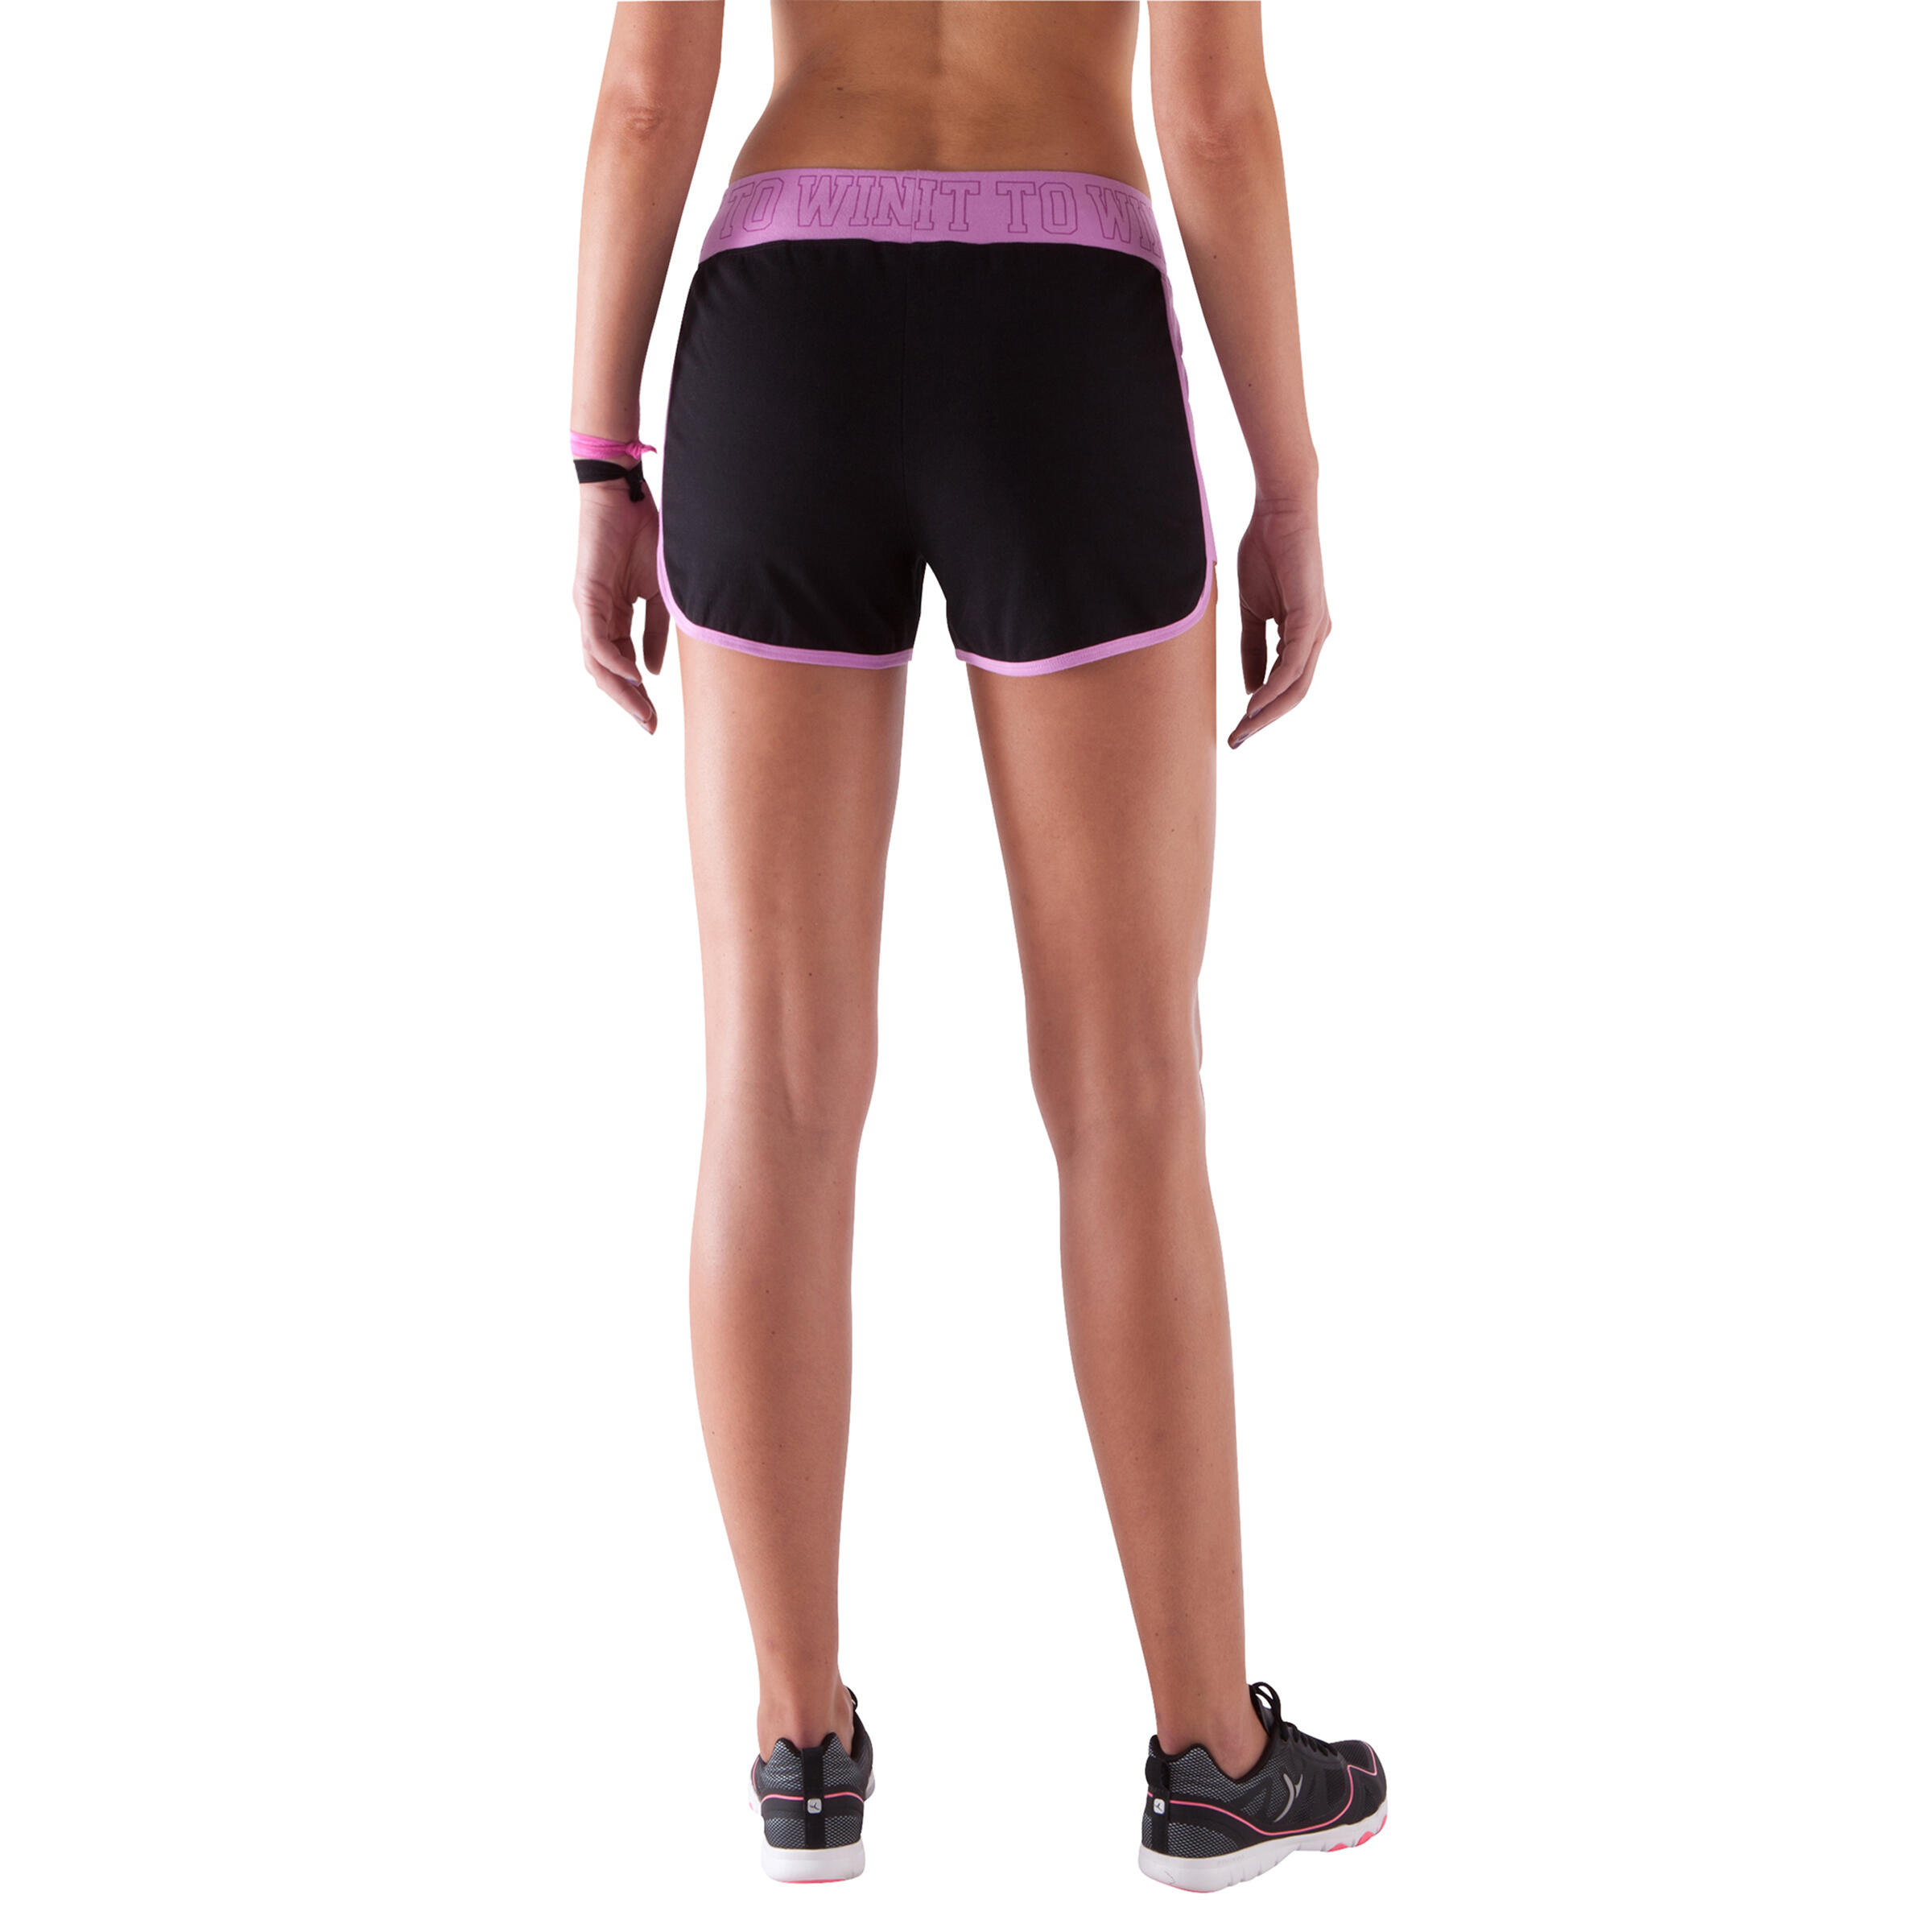 Women's Fitness Shorts with Contrasting Print Waistband - Black/Pink 6/11